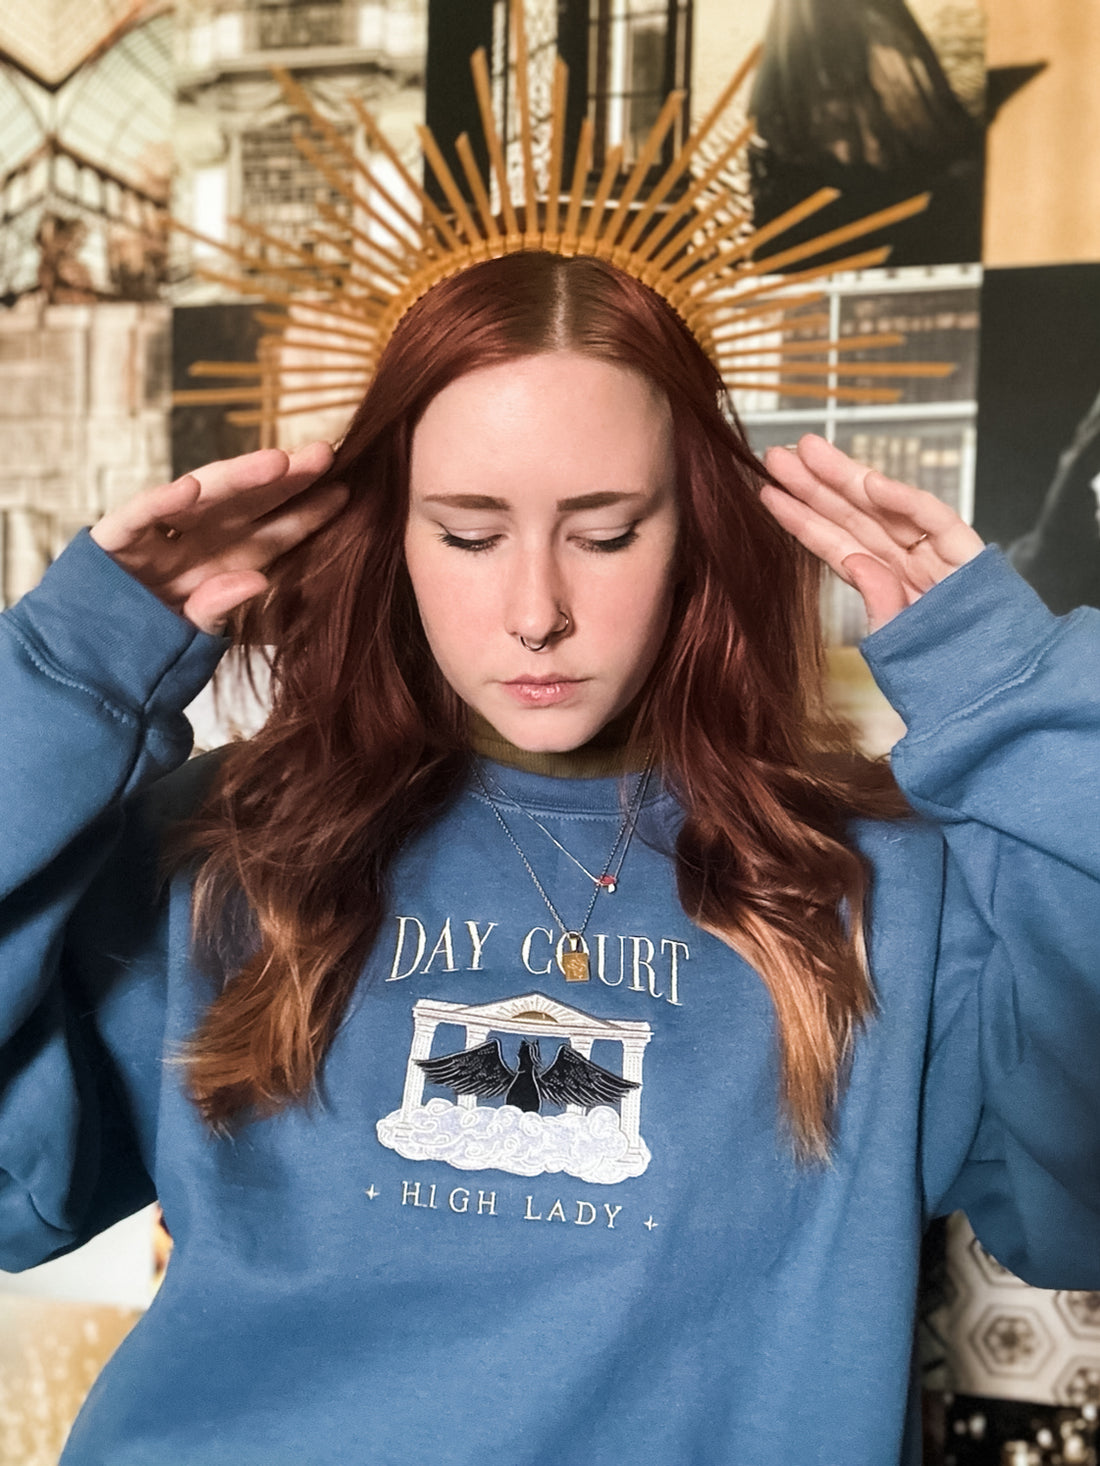 High Lady of the Day Court Crewneck